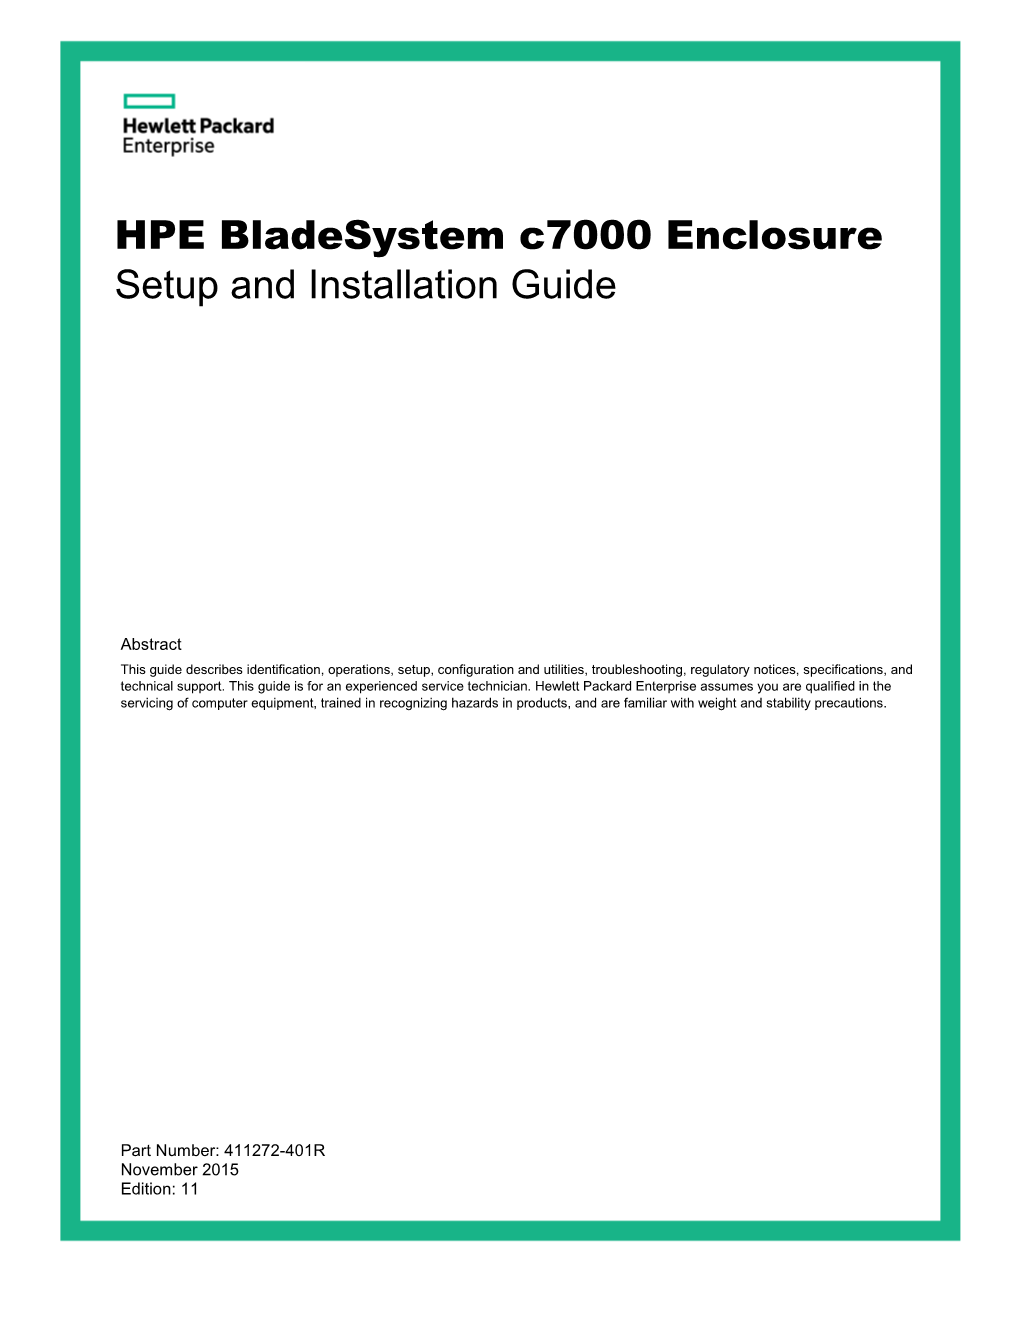 HPE Bladesystem C7000 Enclosure Setup and Installation Guide